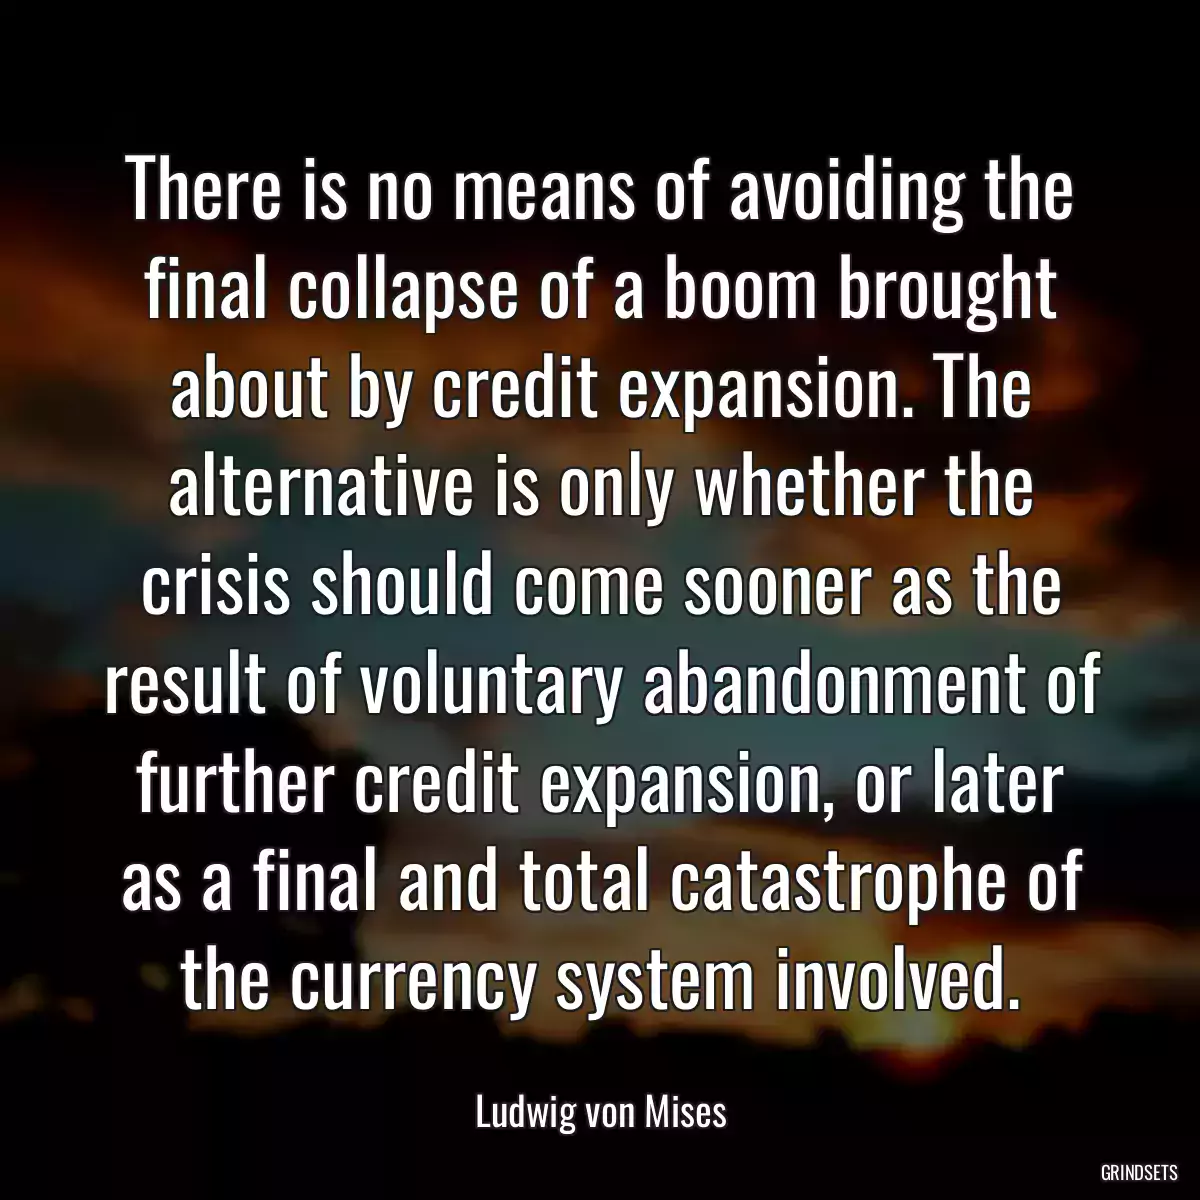 There is no means of avoiding the final collapse of a boom brought about by credit expansion. The alternative is only whether the crisis should come sooner as the result of voluntary abandonment of further credit expansion, or later as a final and total catastrophe of the currency system involved.